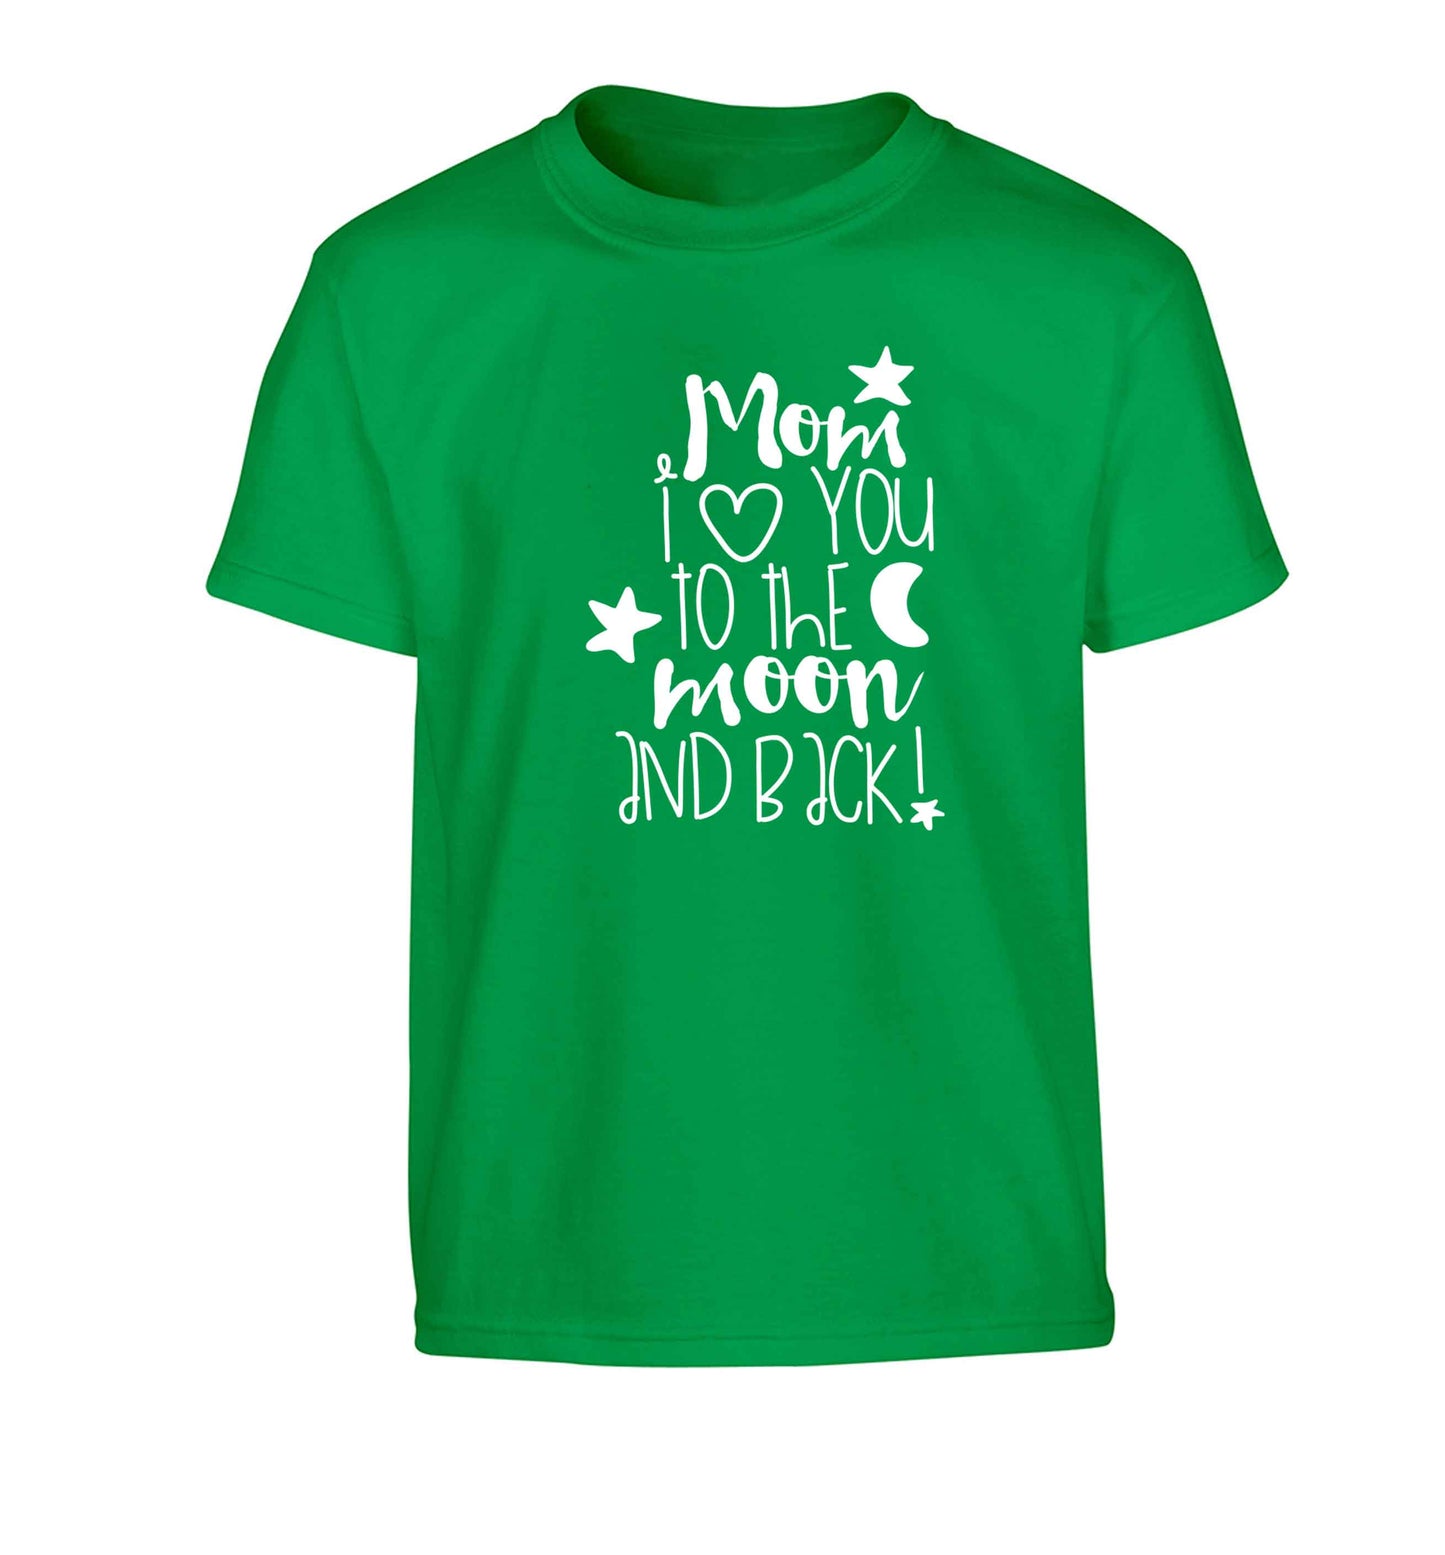 Mom I love you to the moon and back Children's green Tshirt 12-13 Years